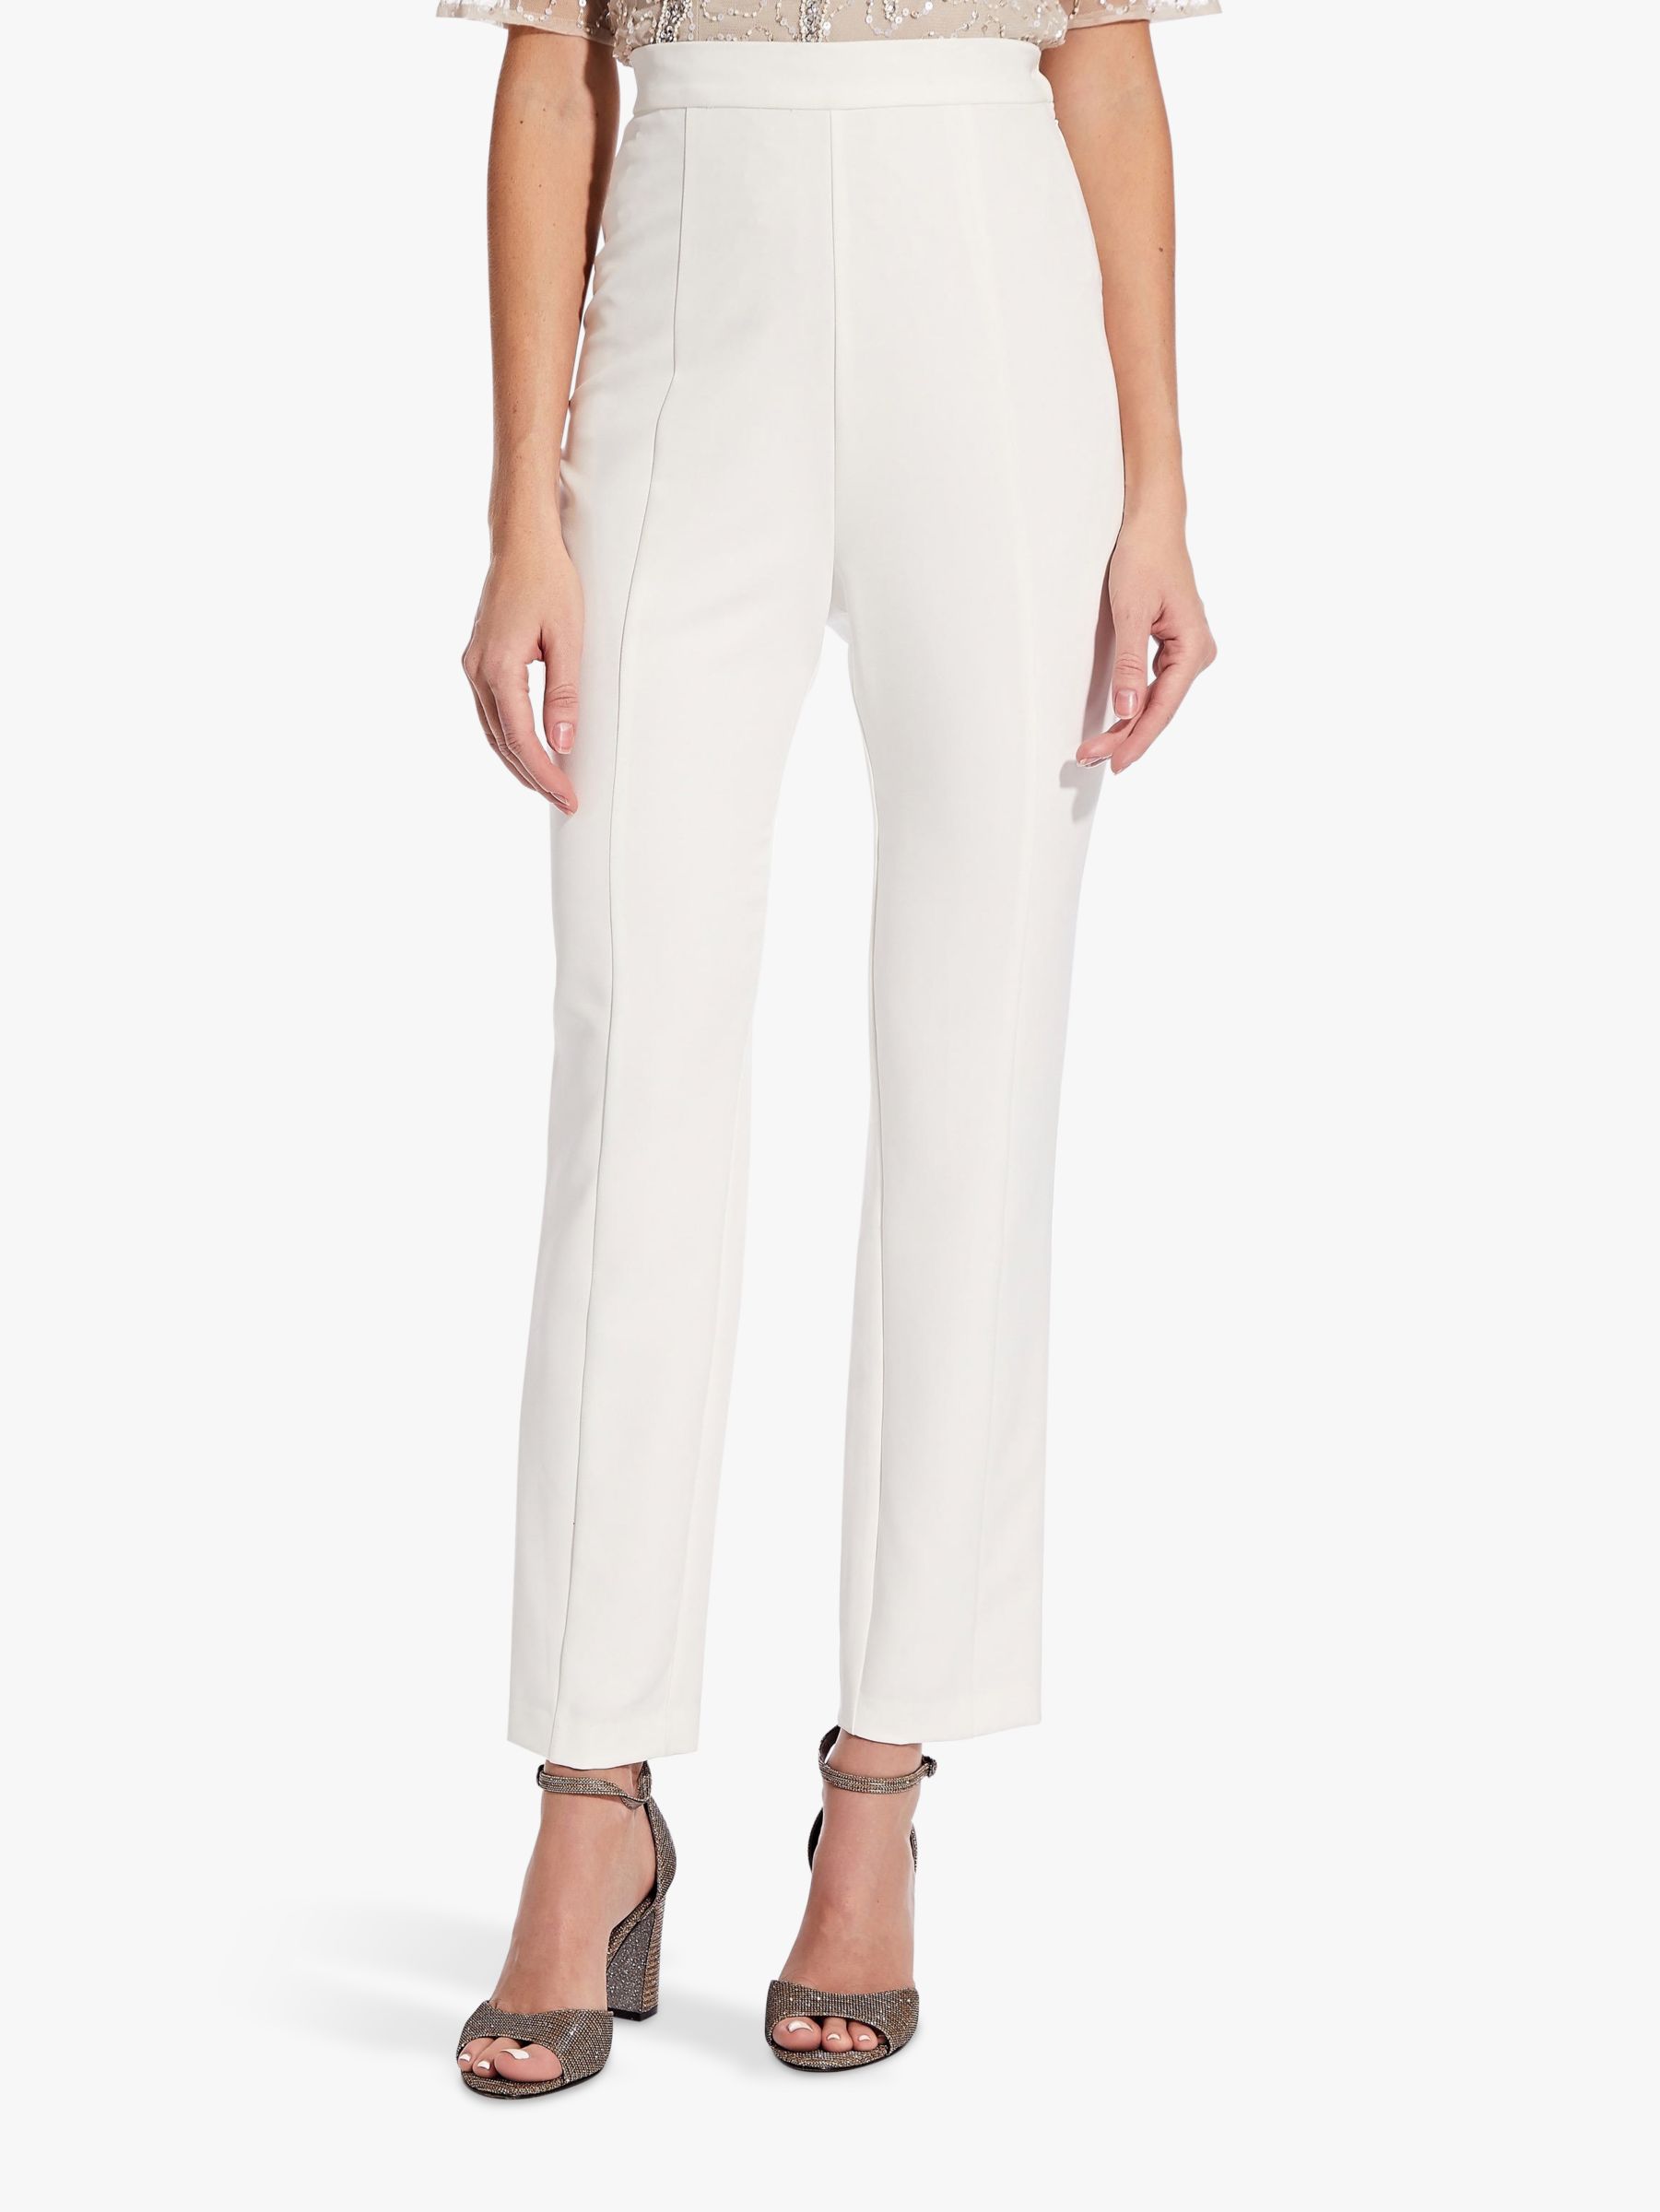 Adrianna Papell Crepe Slim Trousers, Ivory at John Lewis & Partners